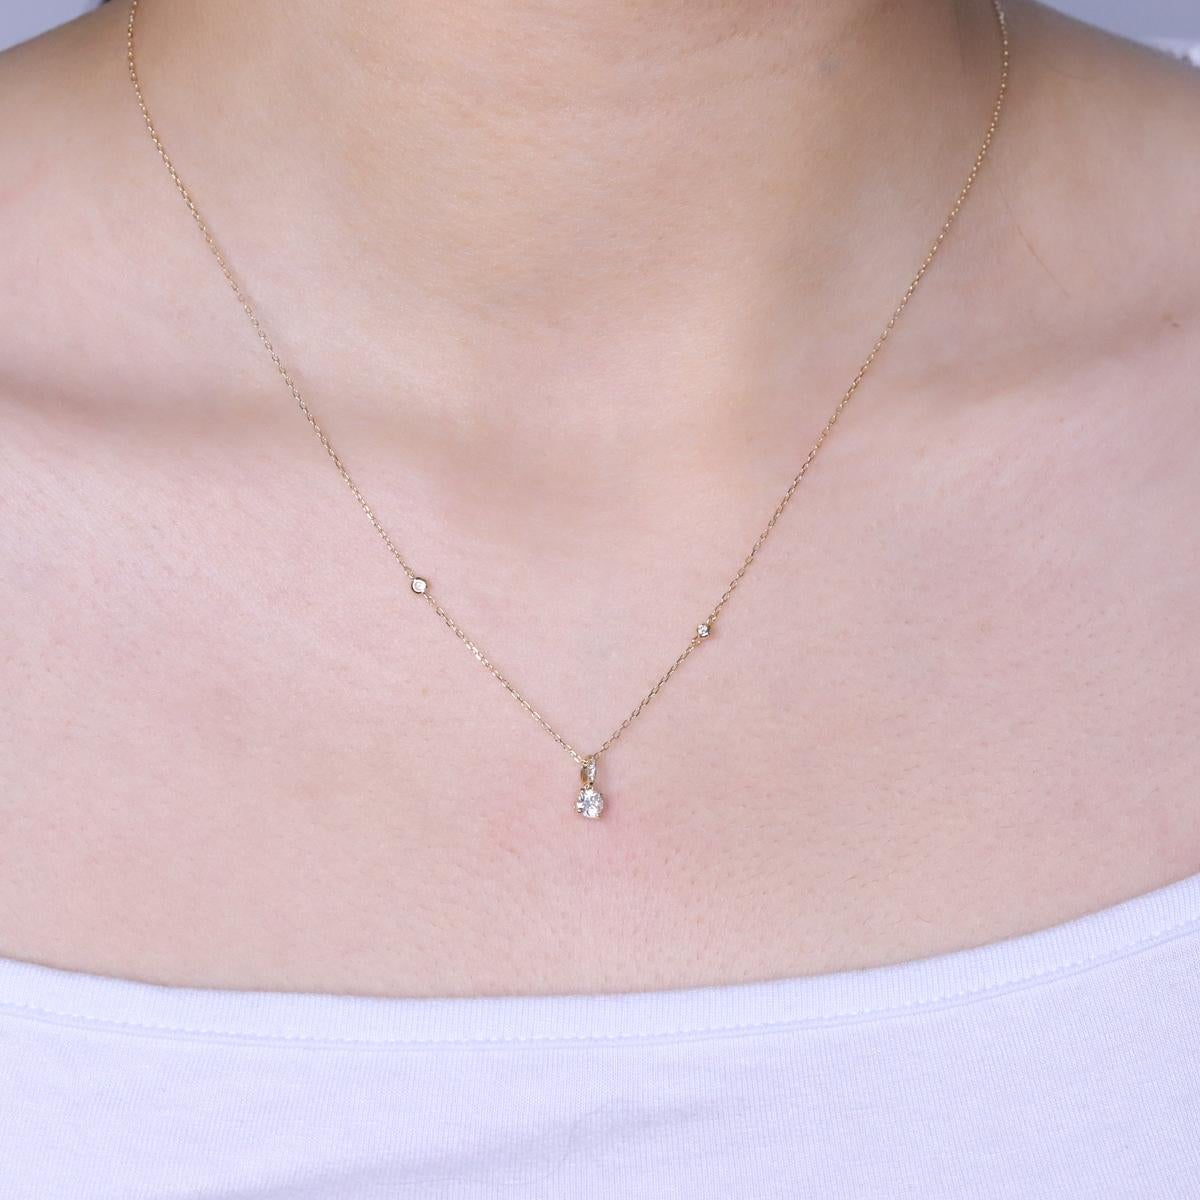 Decorate yourself in elegance with this Pendant is crafted from 14-karat Yellow Gold by Gin & Grace. This Pendant is made up of Round-cut White Diamond (6 Pcs) 0.24 Carat. This Pendant is weight 1.20 grams. This delicate Pendant is polished to a